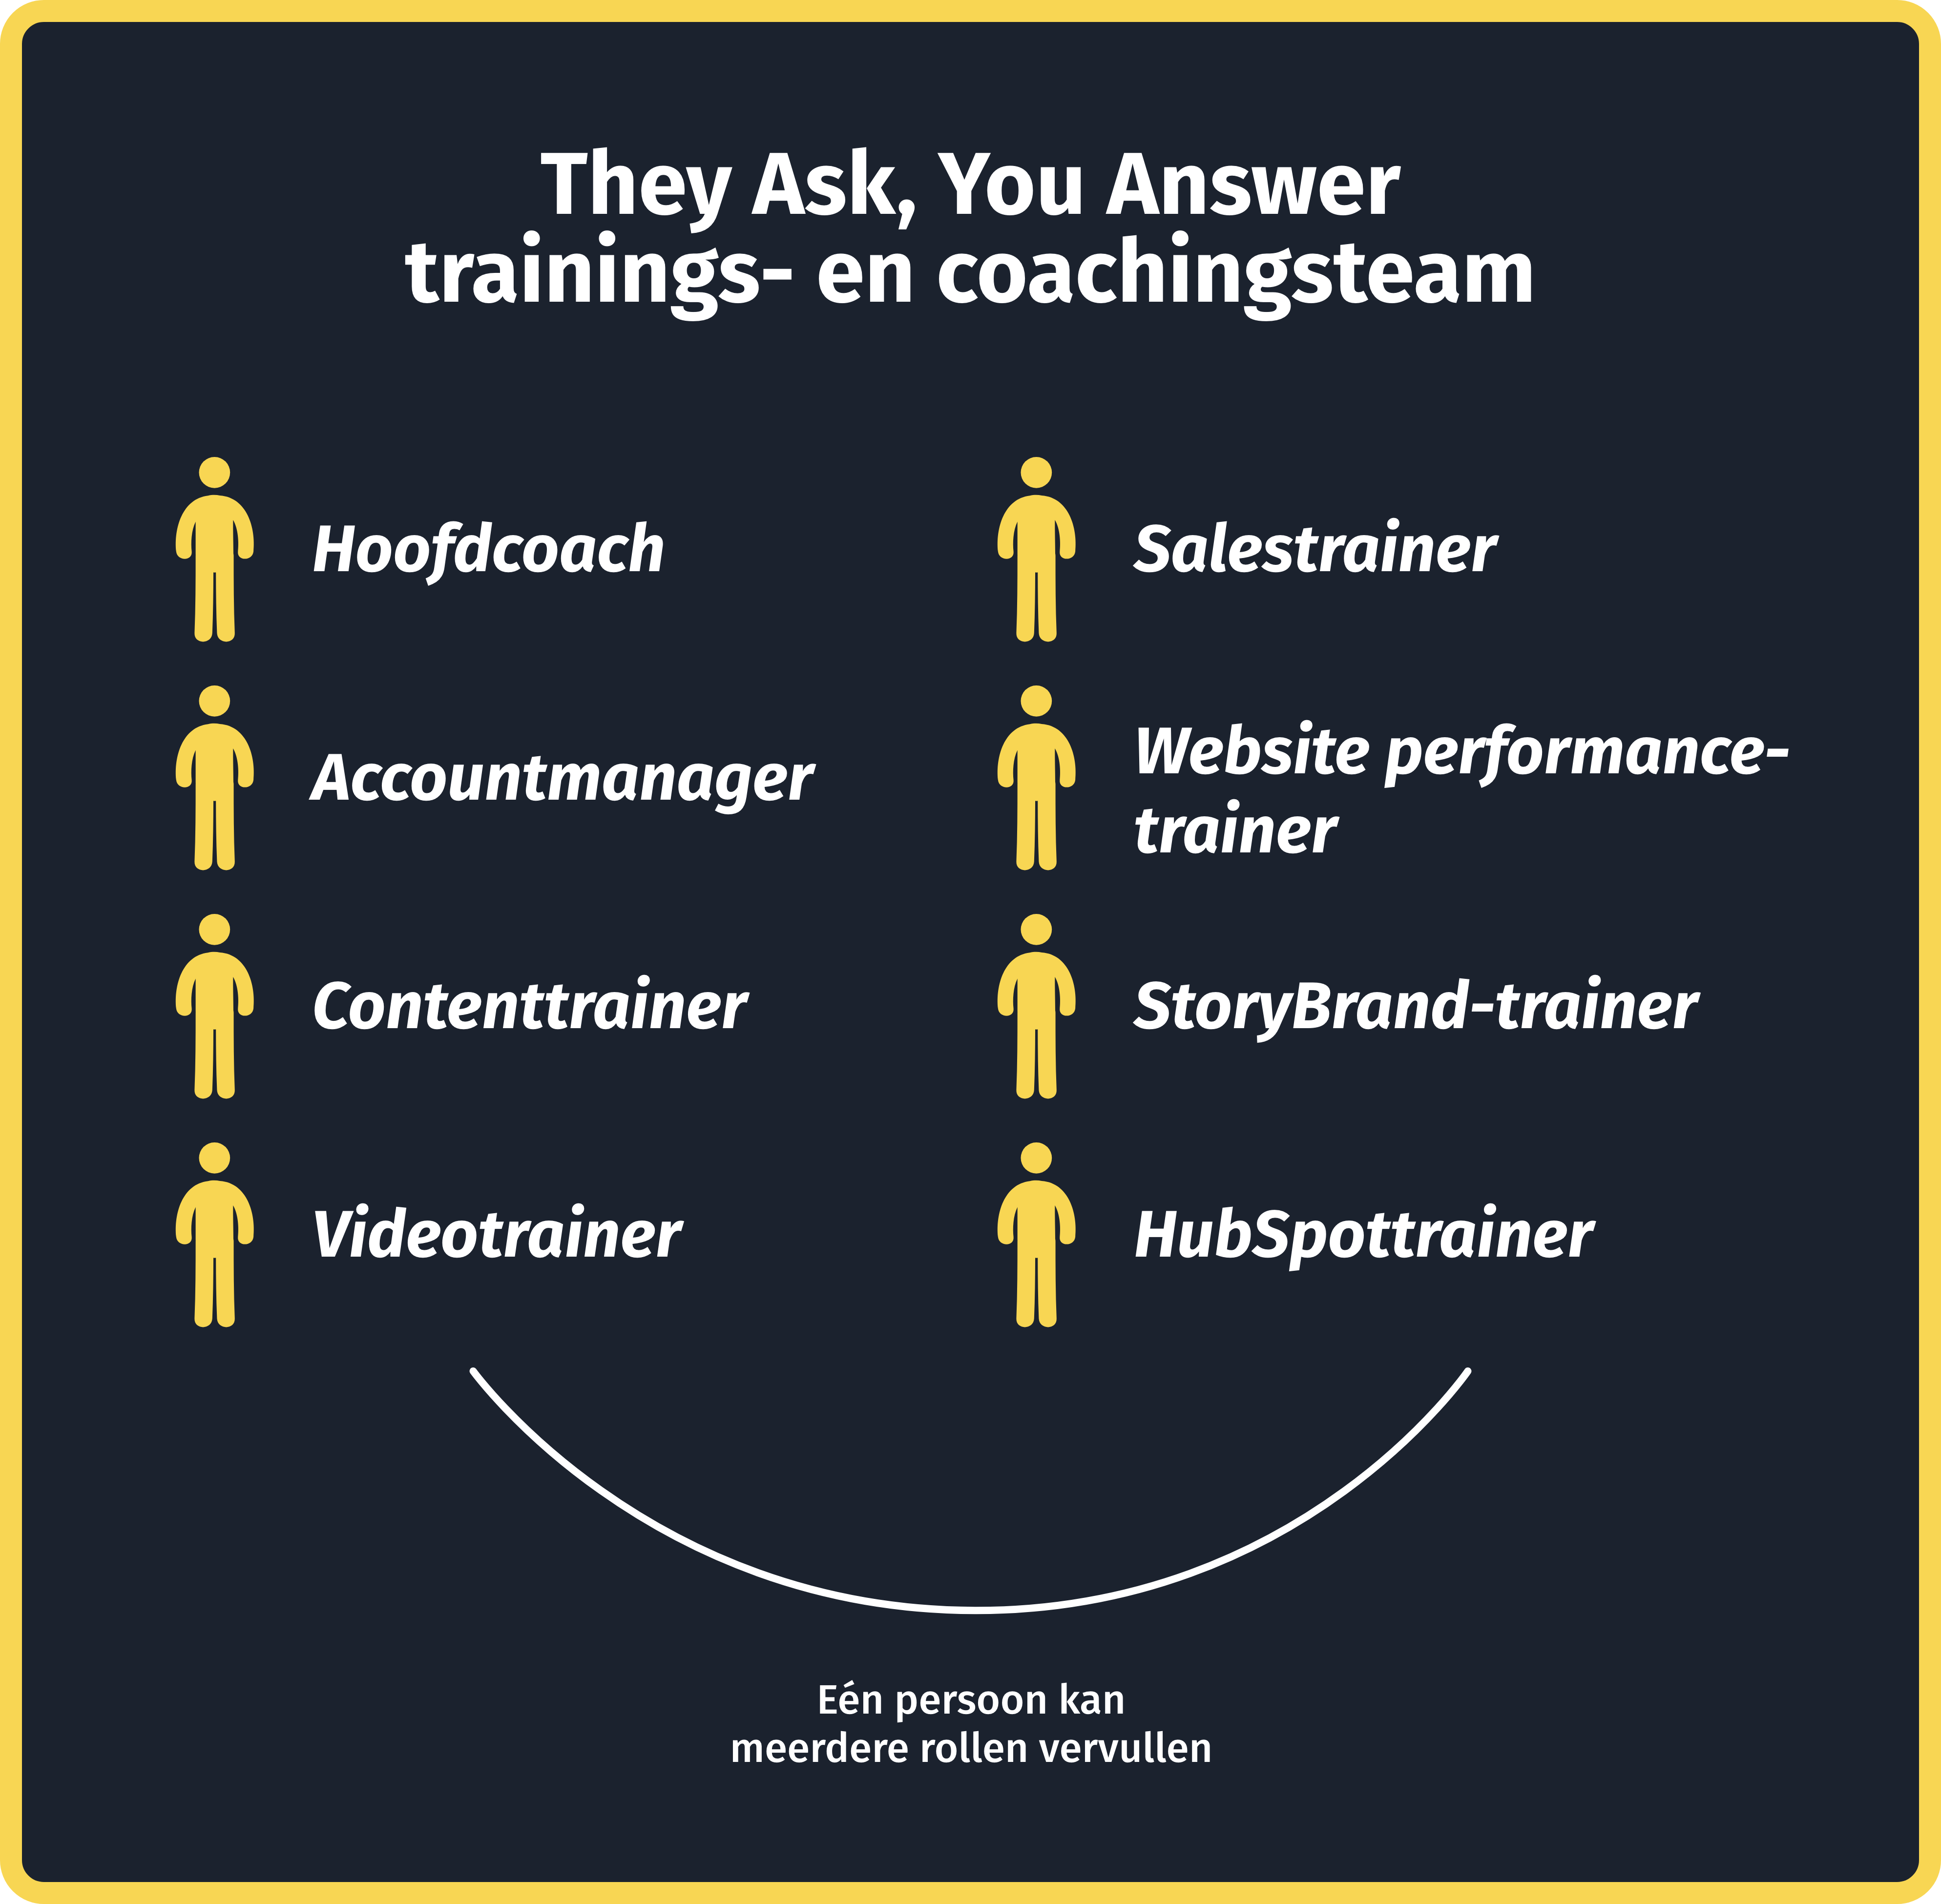 They Ask, You Answer trainings- en coachingsteam